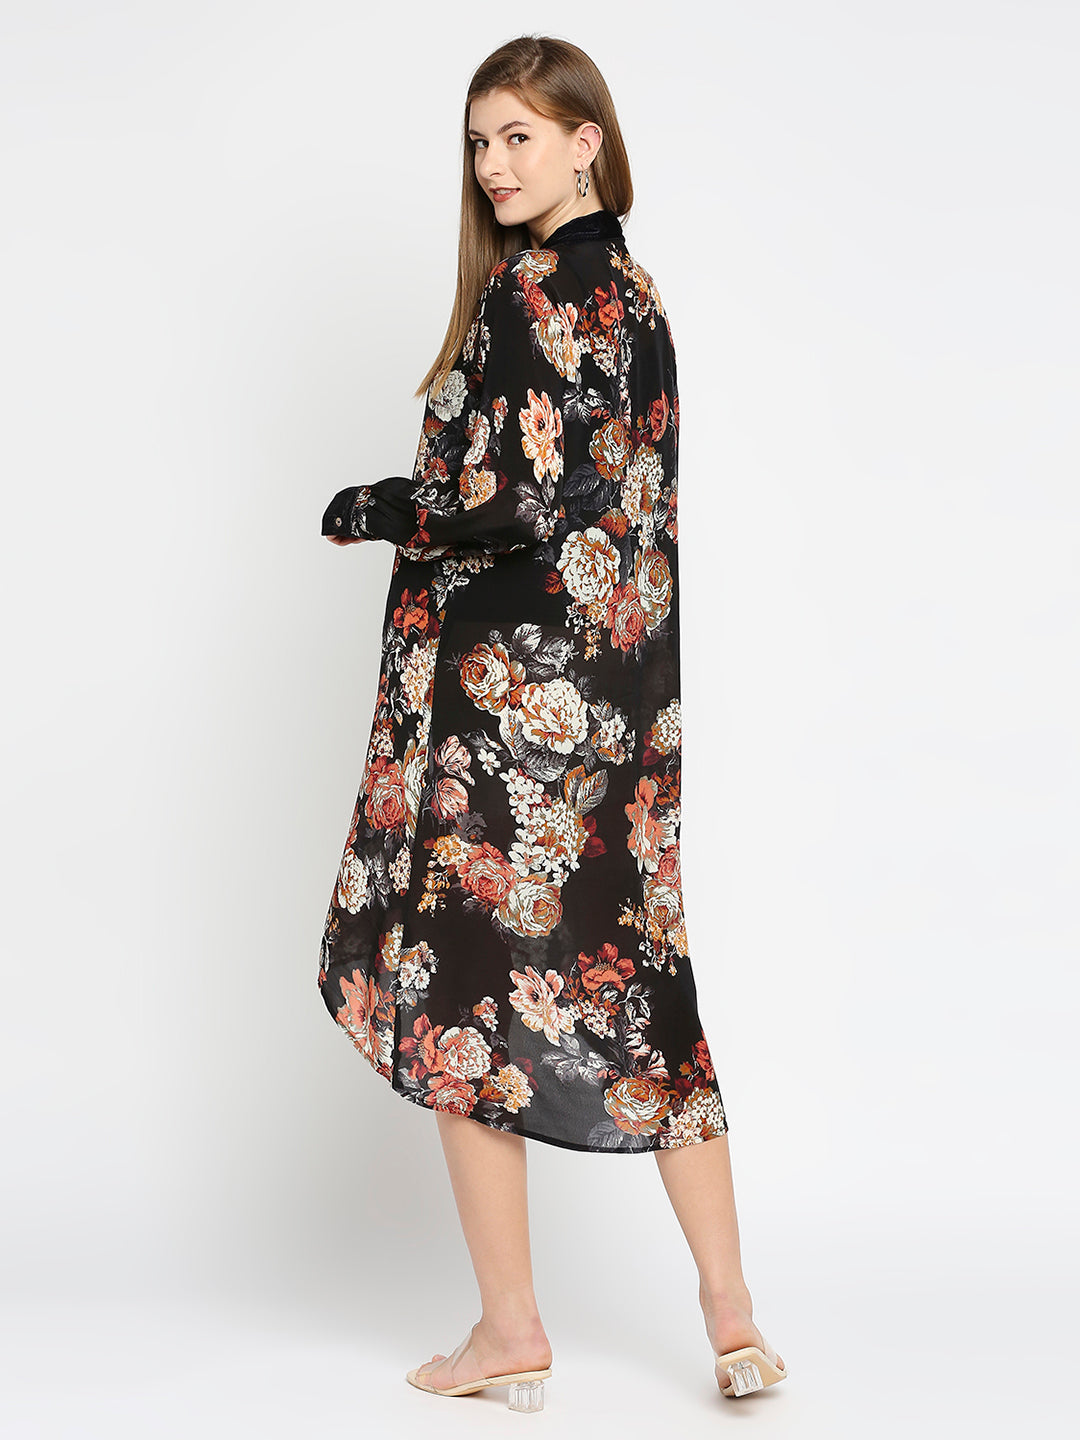 Black Floral Printed Button up Dress